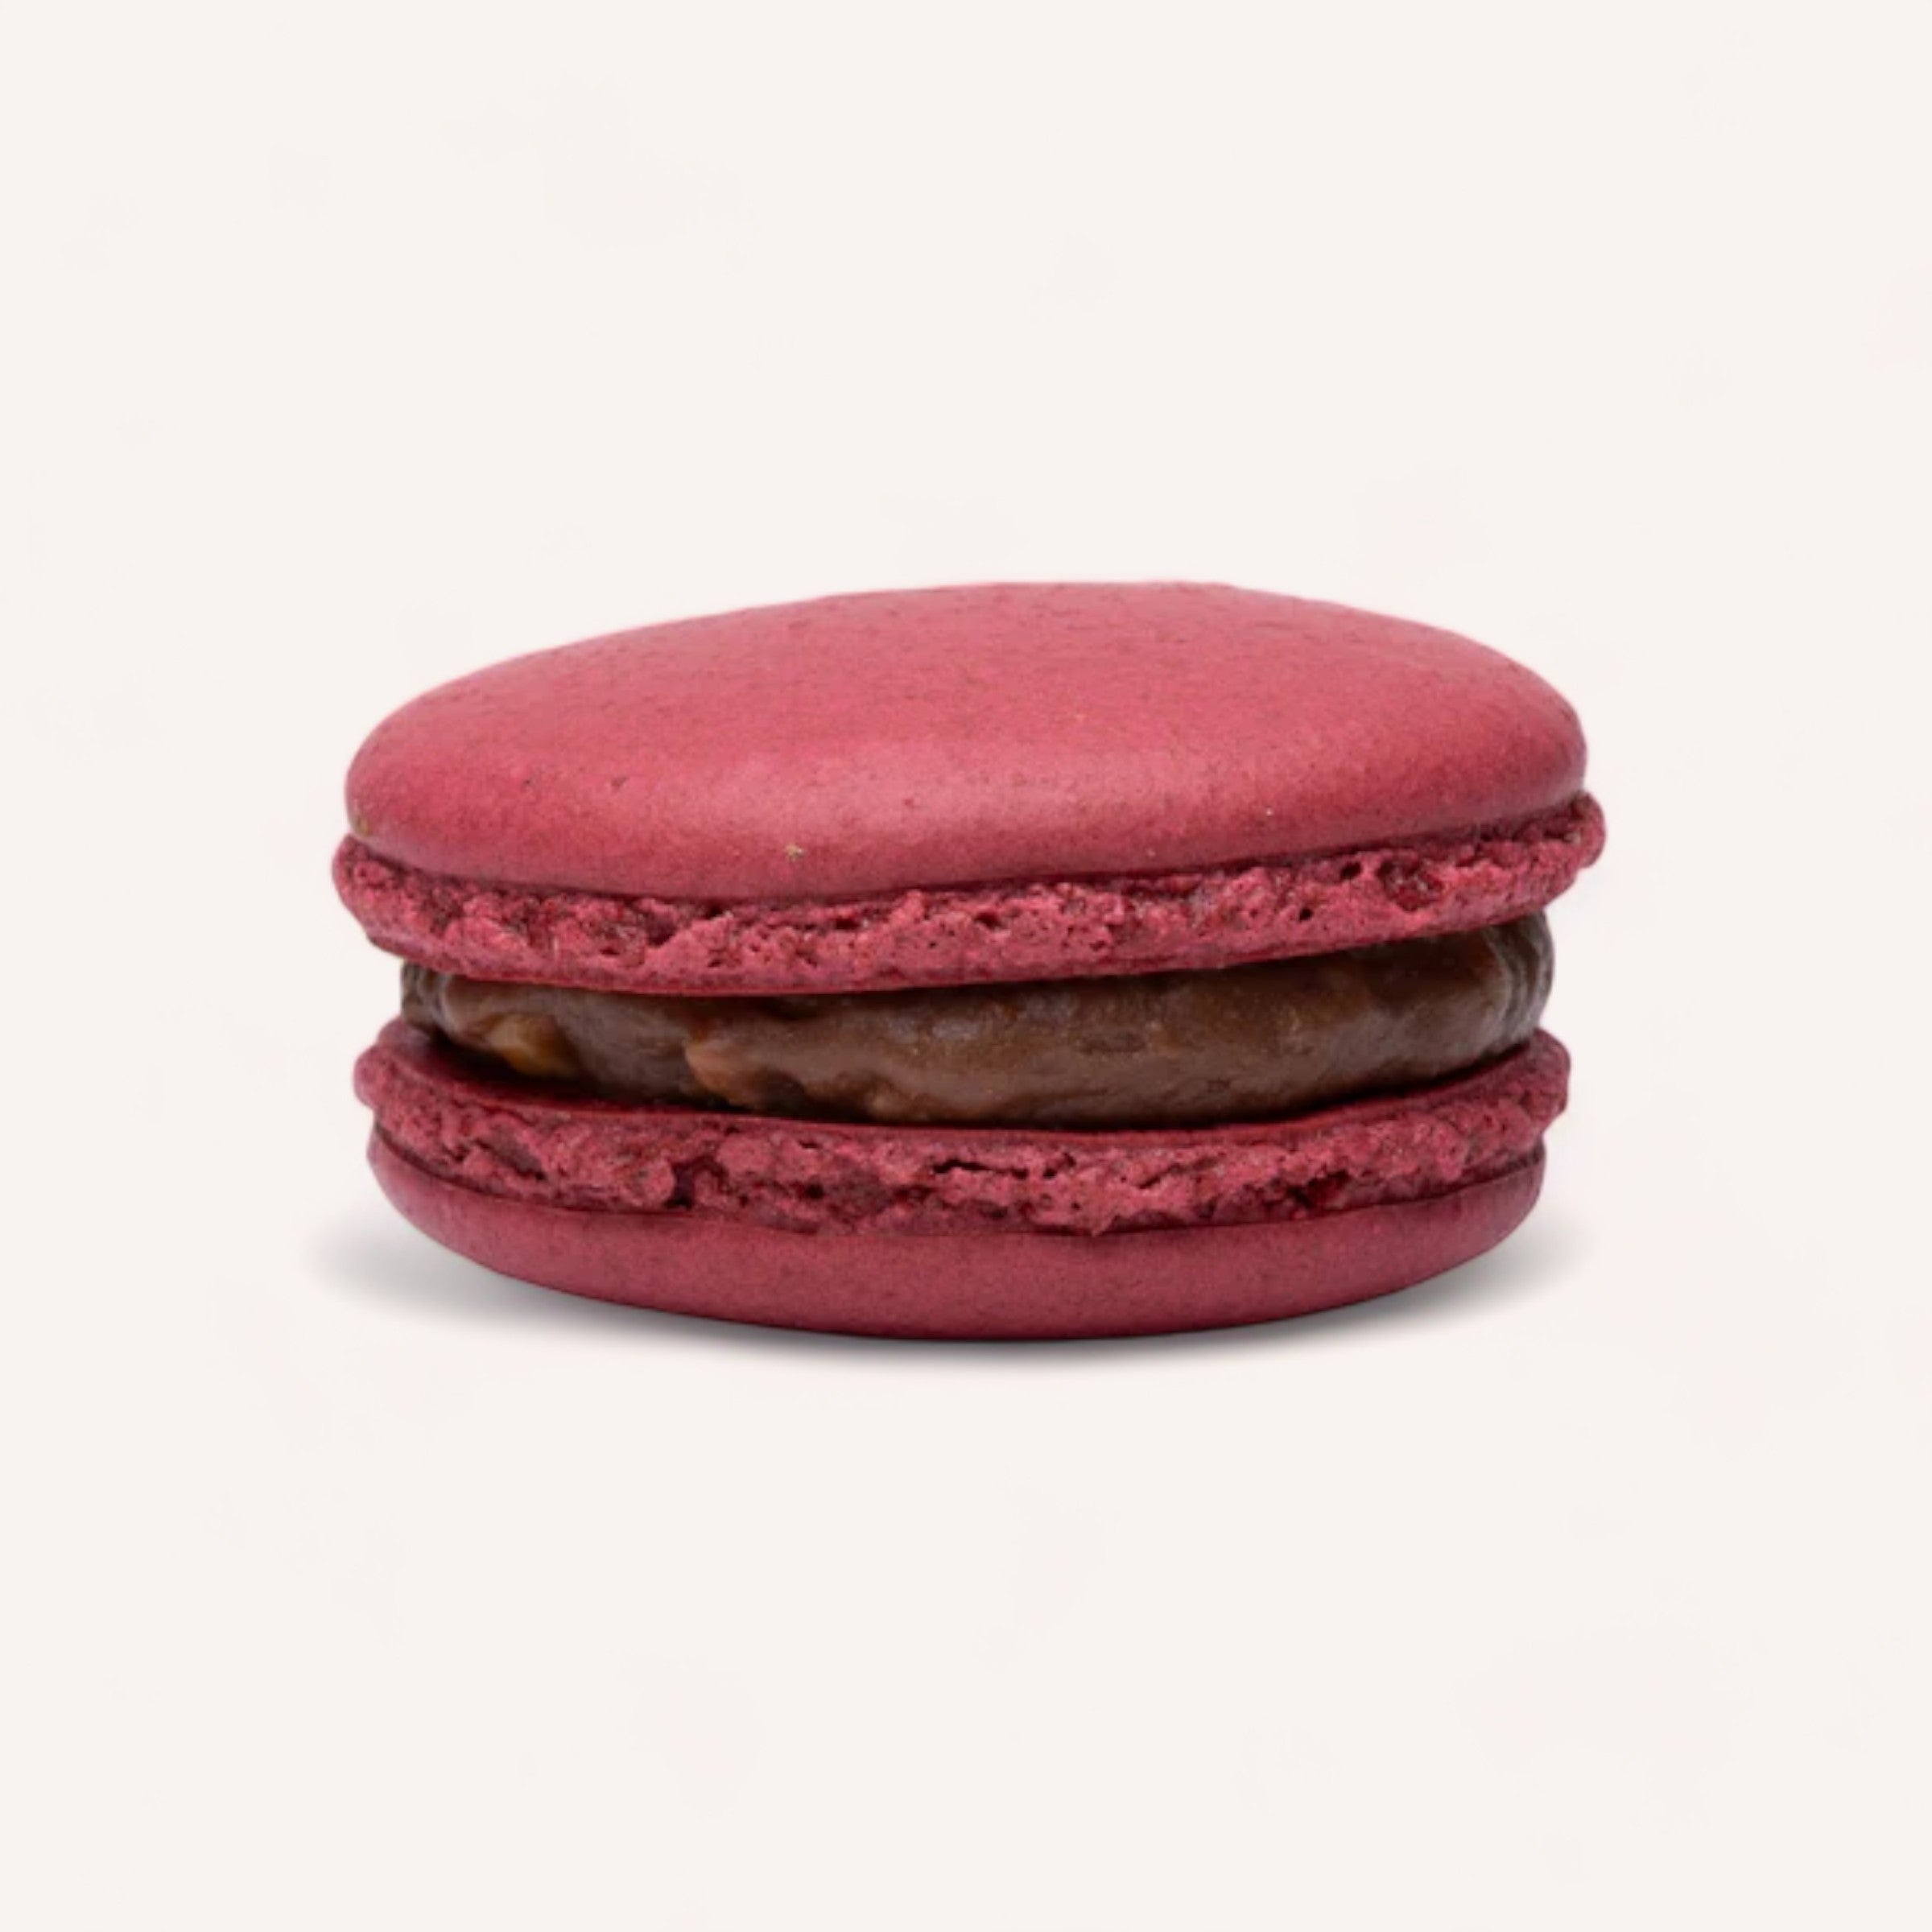 A delectable red, handmade macaron filled with a rich, creamy chocolate ganache, isolated on a white background from the Box of 6 Macarons by J'aime les Macarons.